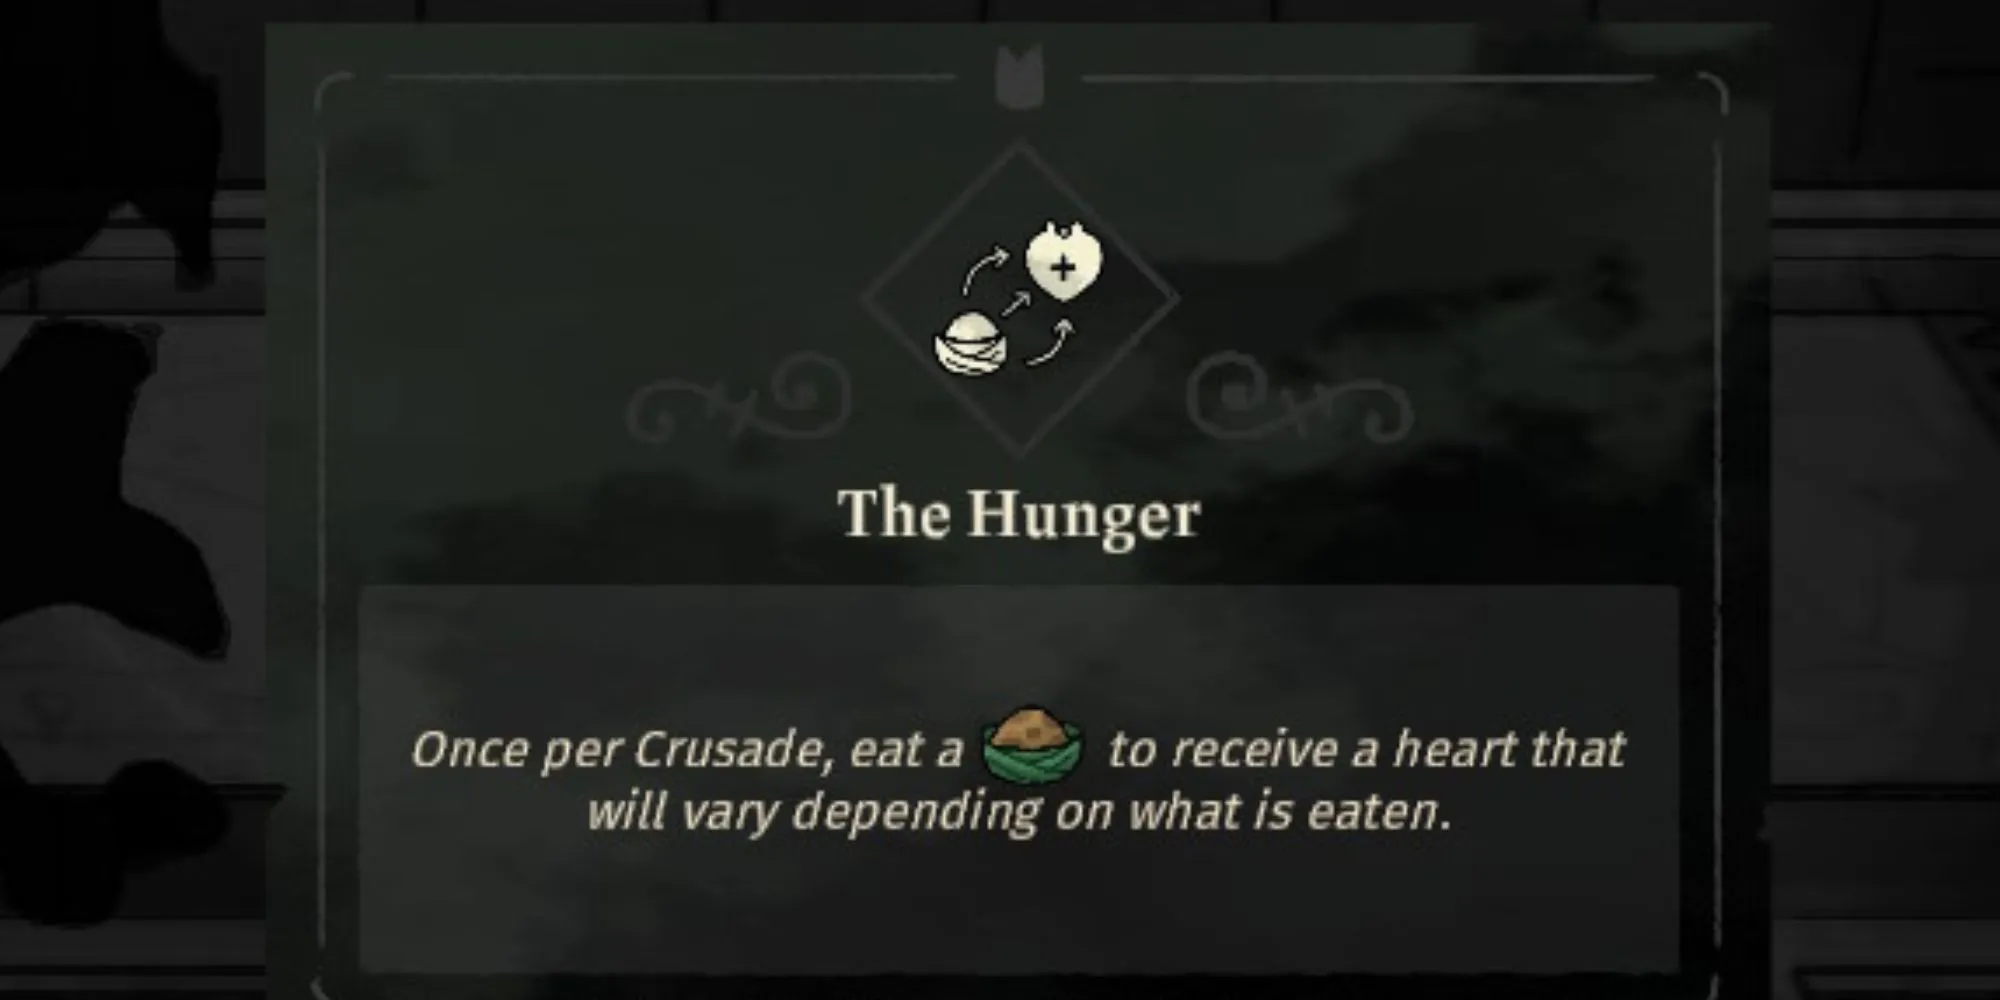 The Hunger upgrade in Cult of the Lamb